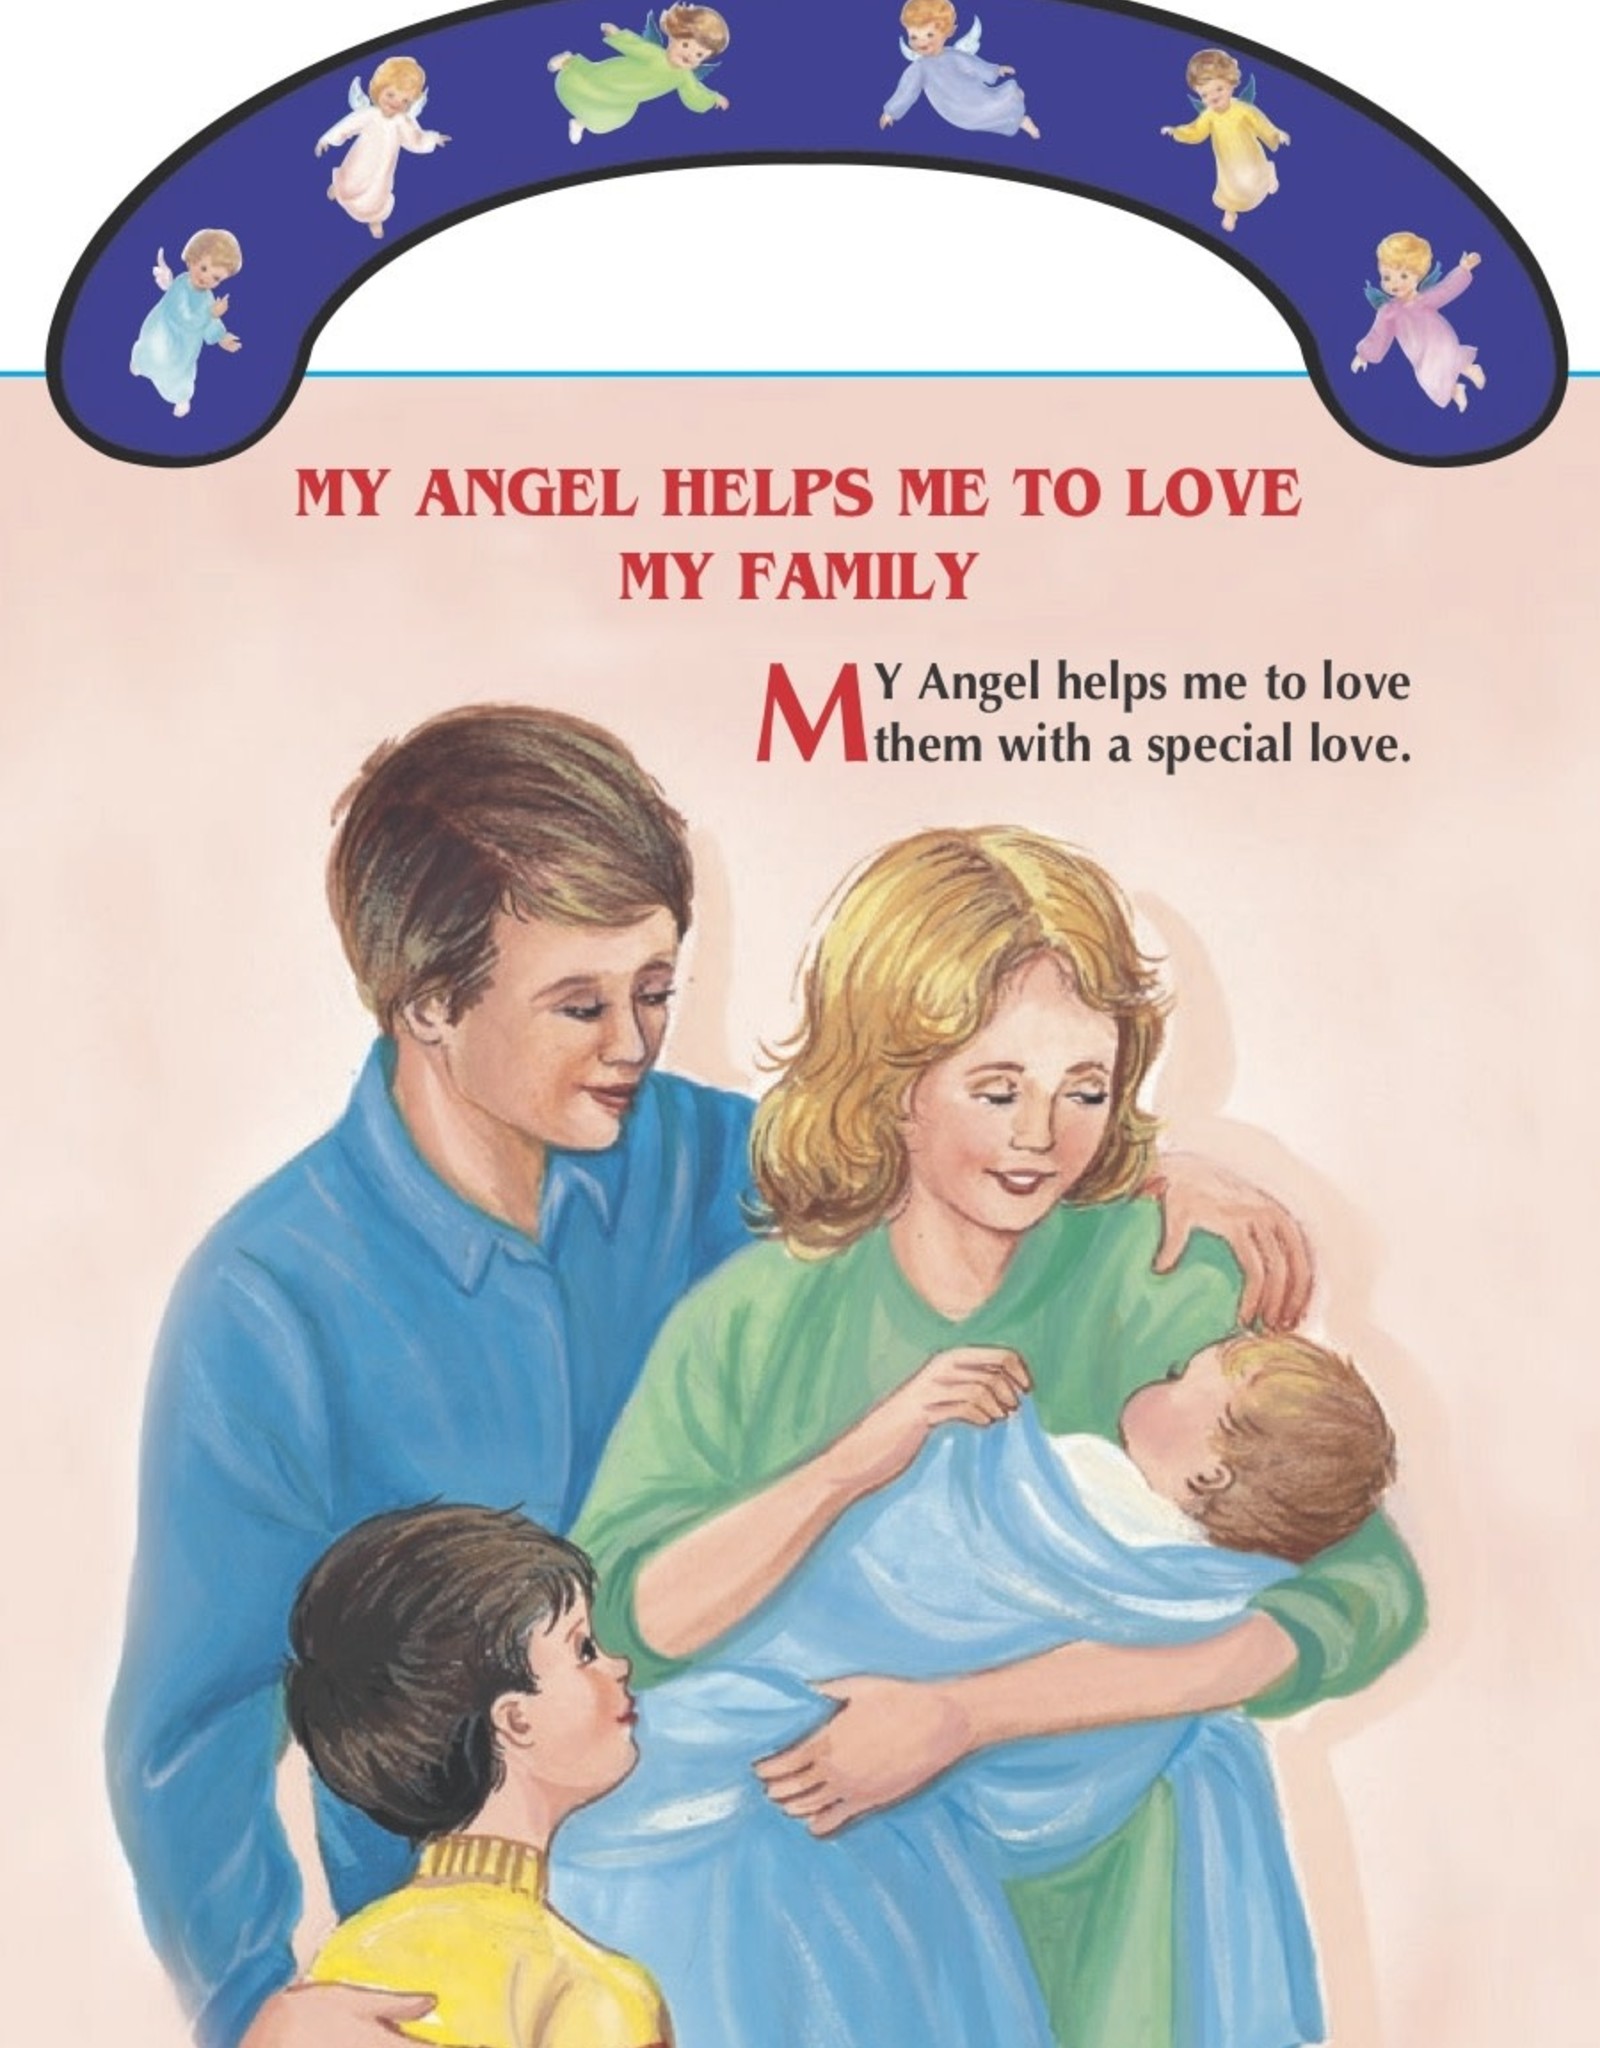 Catholic Book Publishing Our Guardian Angels (St. Joseph "Carry-Me-Along" Board Book), by George Brundage